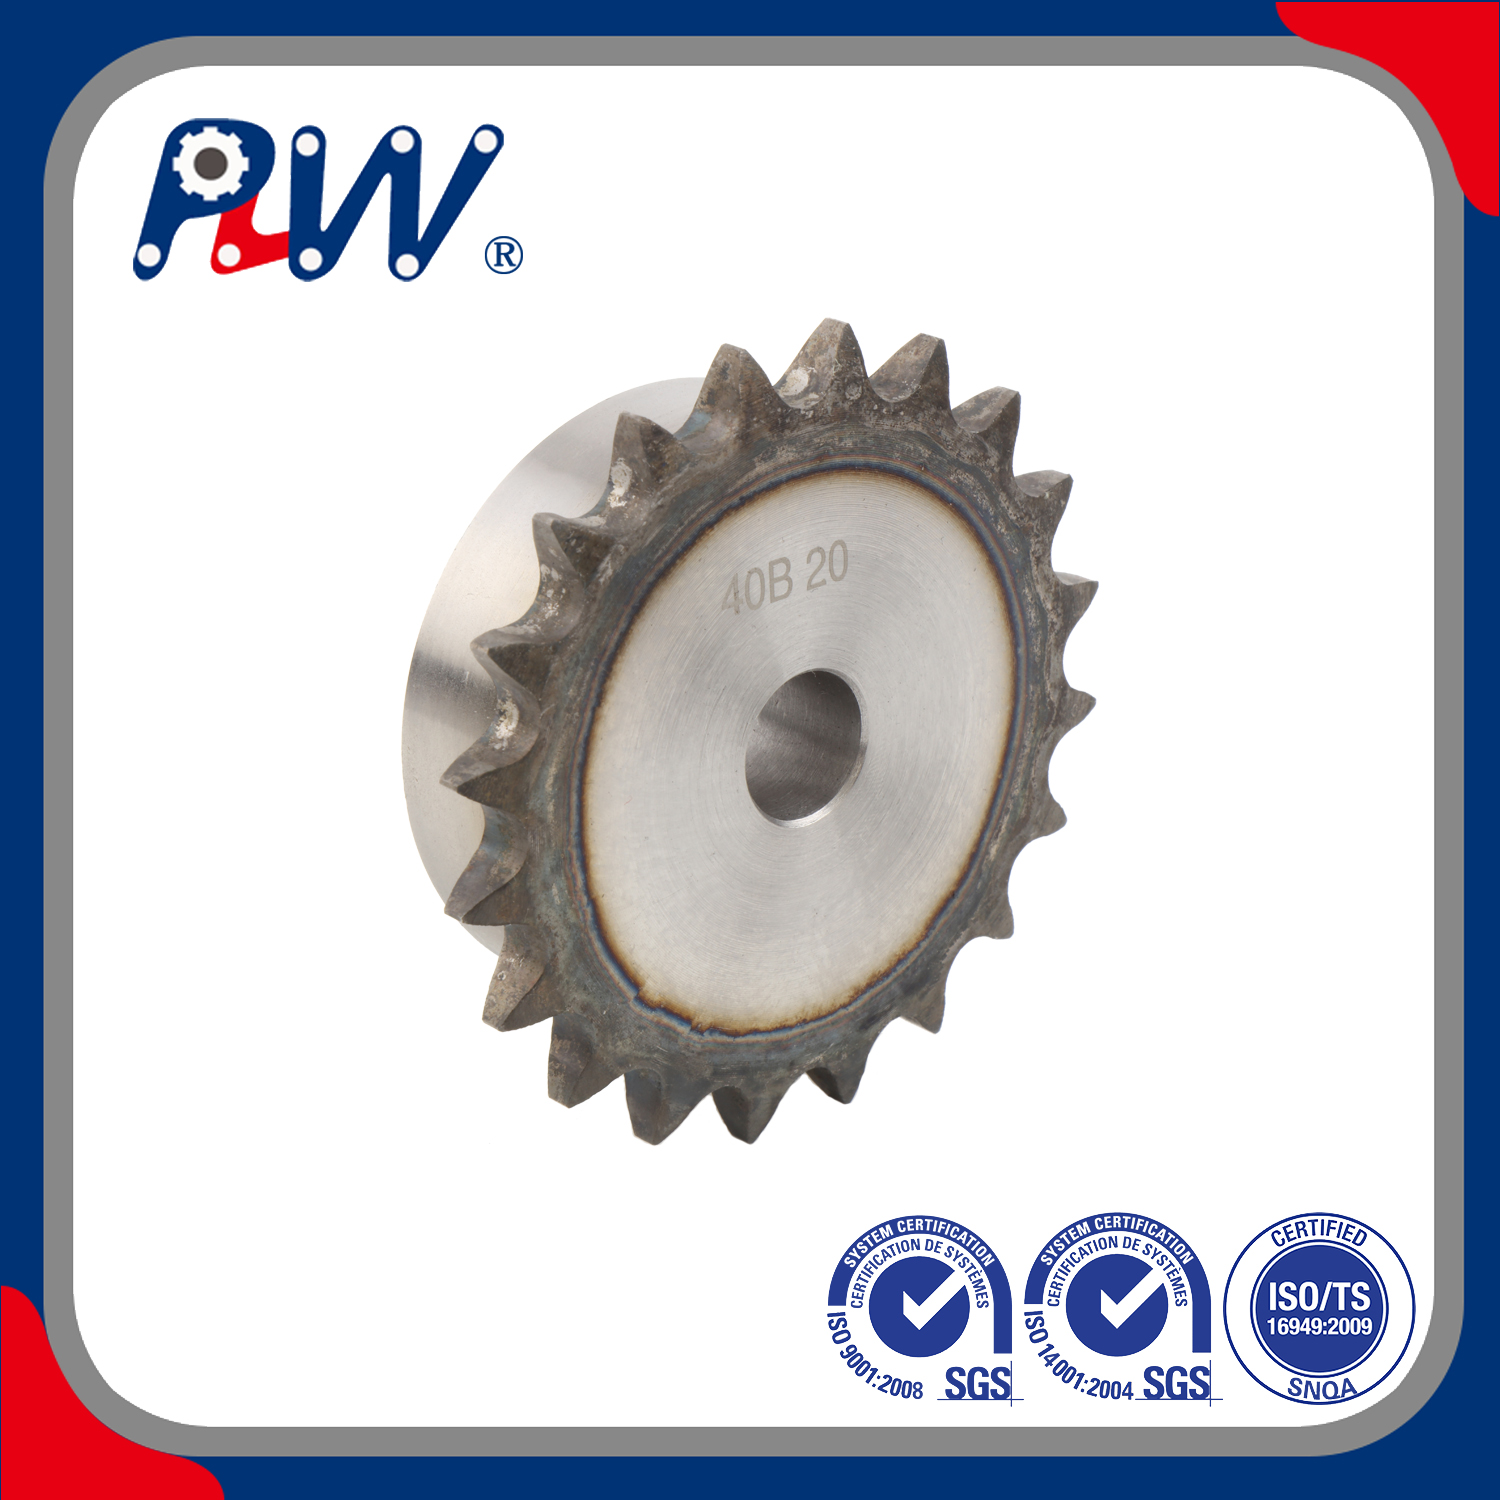 40b-20 DIN Standard Teeth Surface Heating Treatment Sprockets for B Series Roller Chain